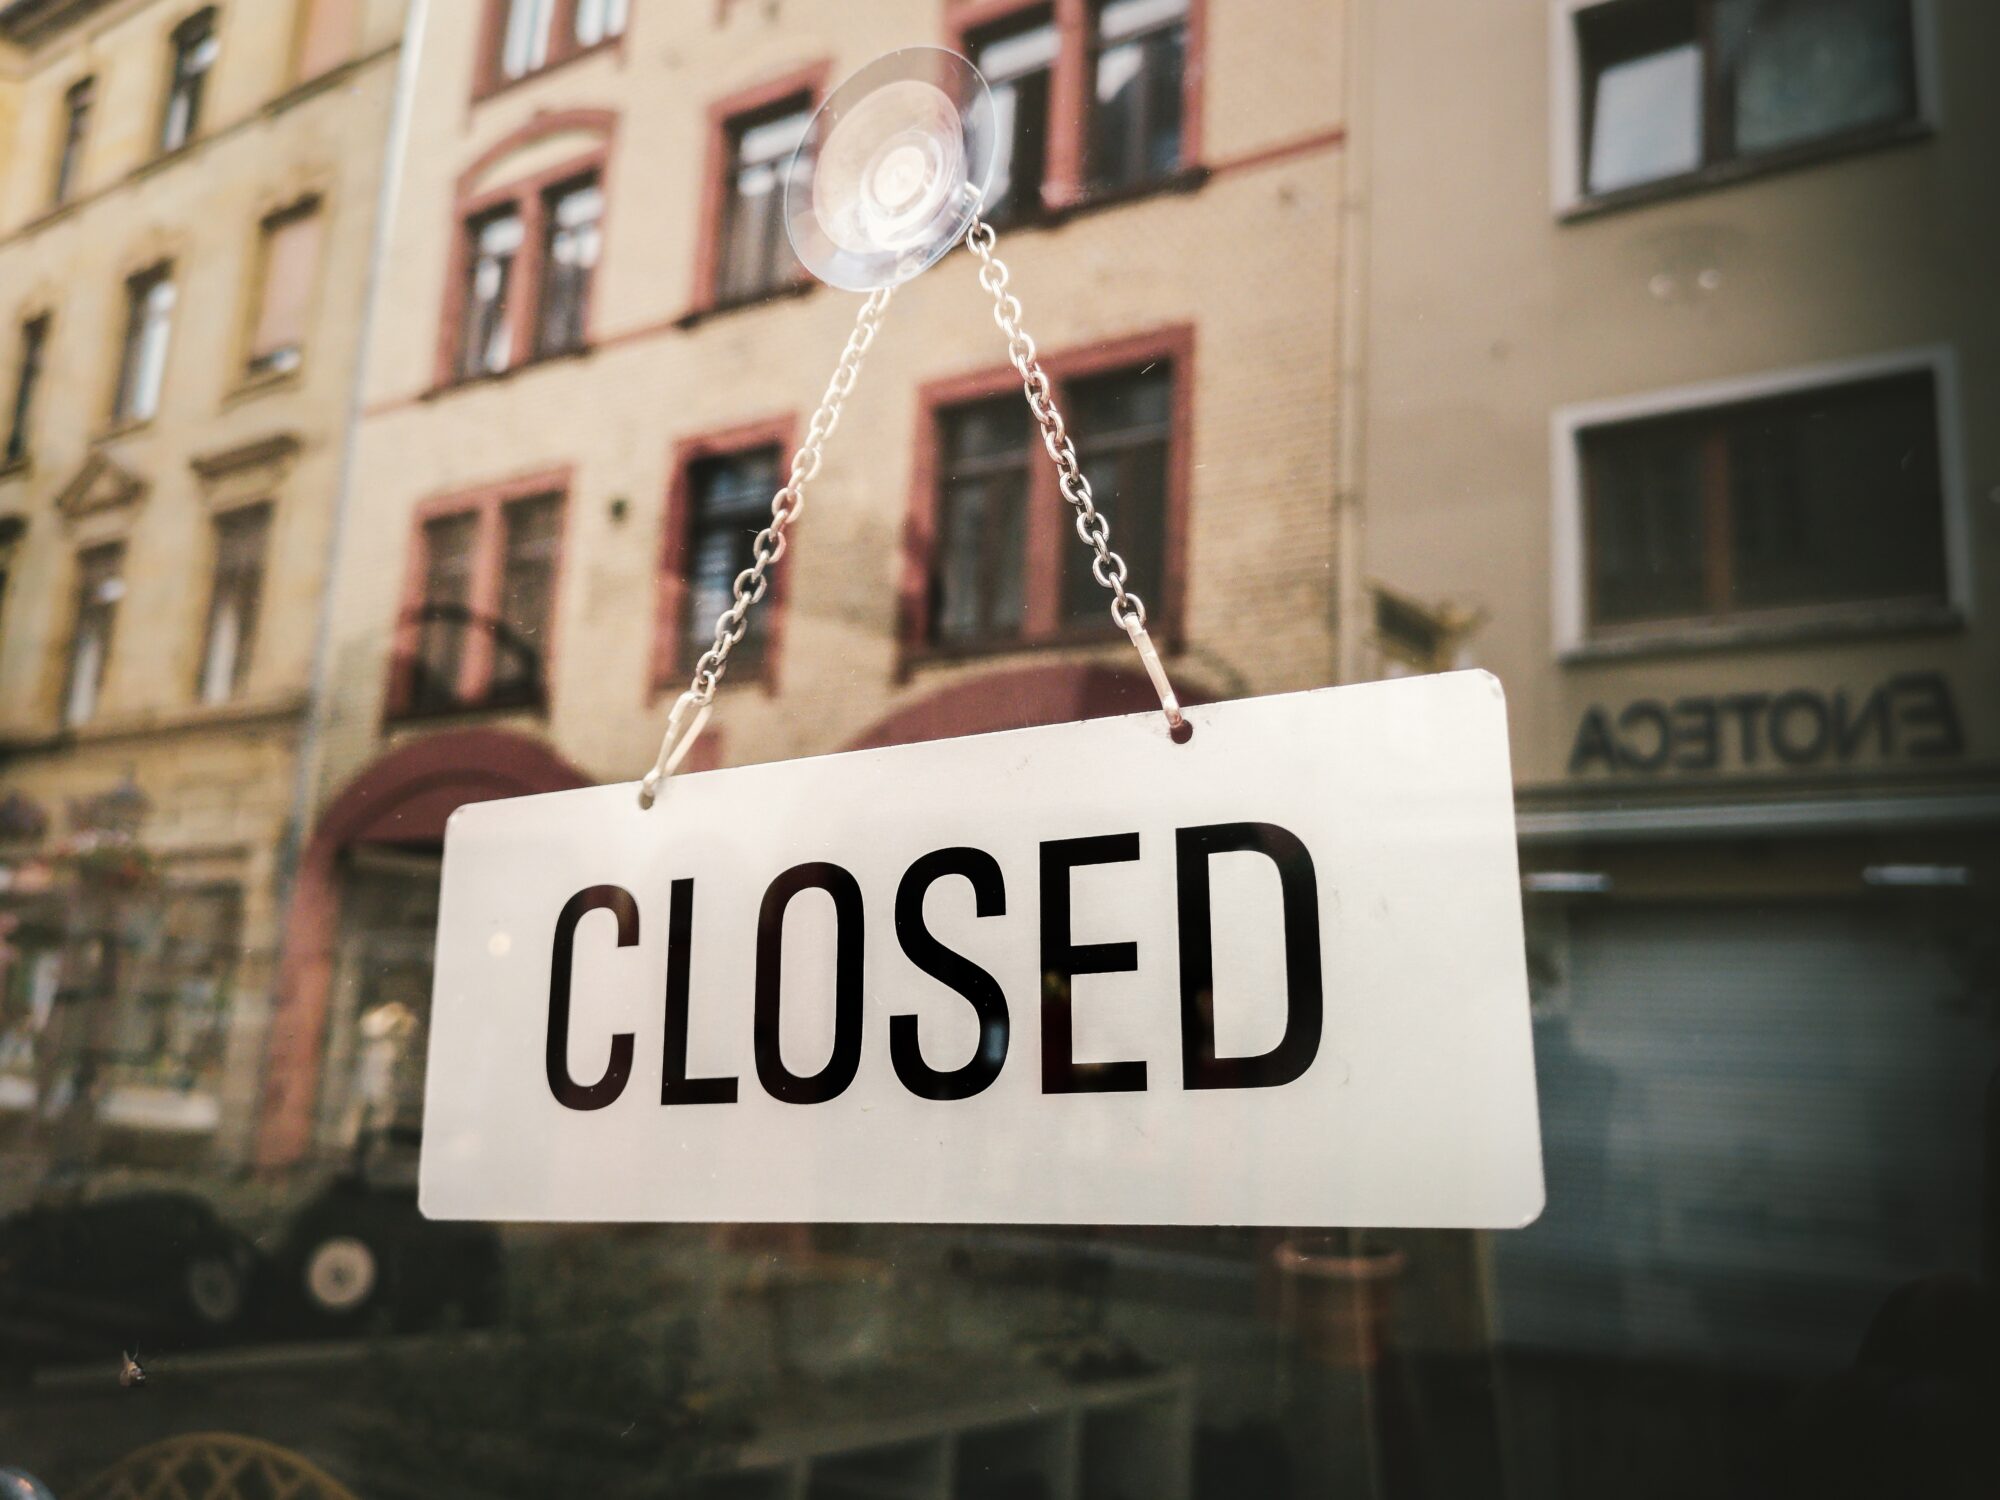 Image of a closed sign hanging at the door of a shop